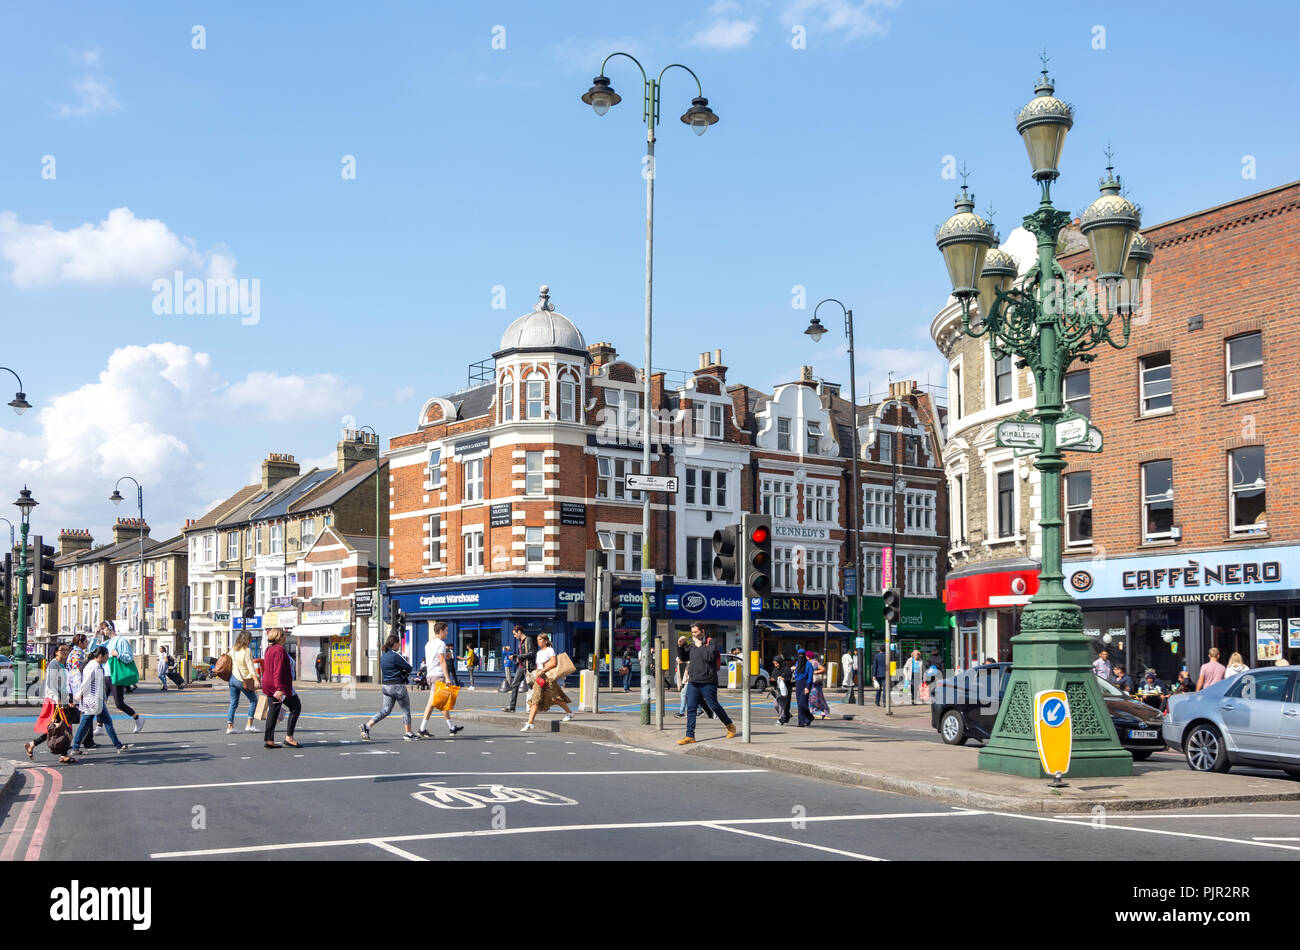 Giunzione di Tooting High Street e Mitcham Road, Tooting, London Borough of Wandsworth, Greater London, England, Regno Unito Foto Stock